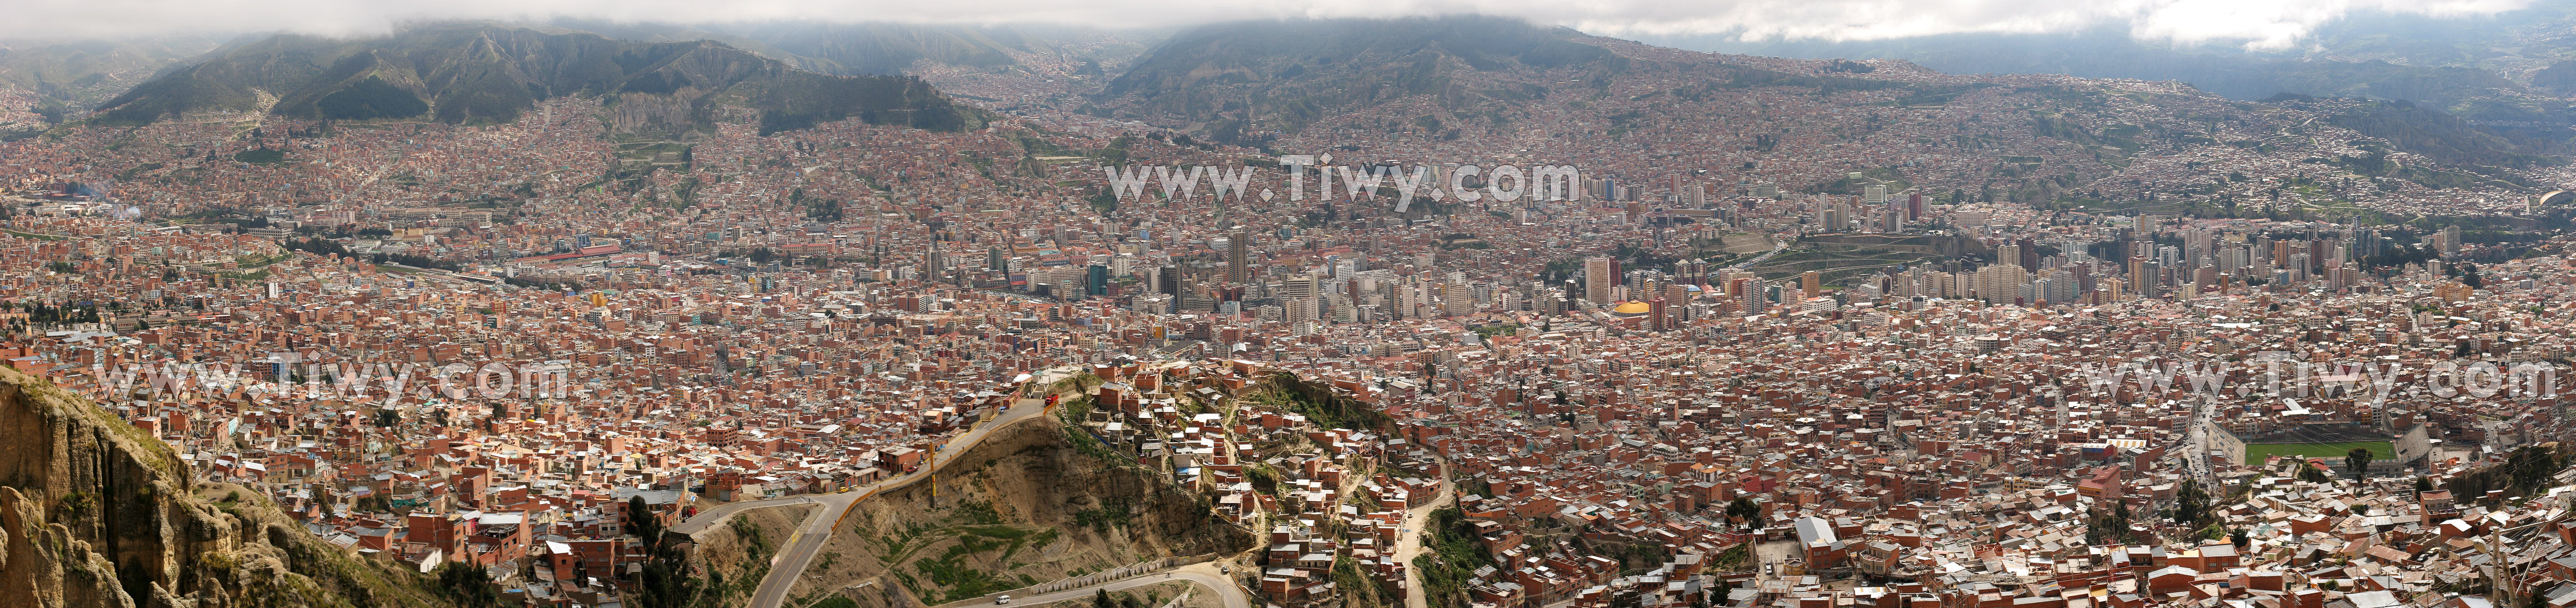 Panorama of the central part of La Paz